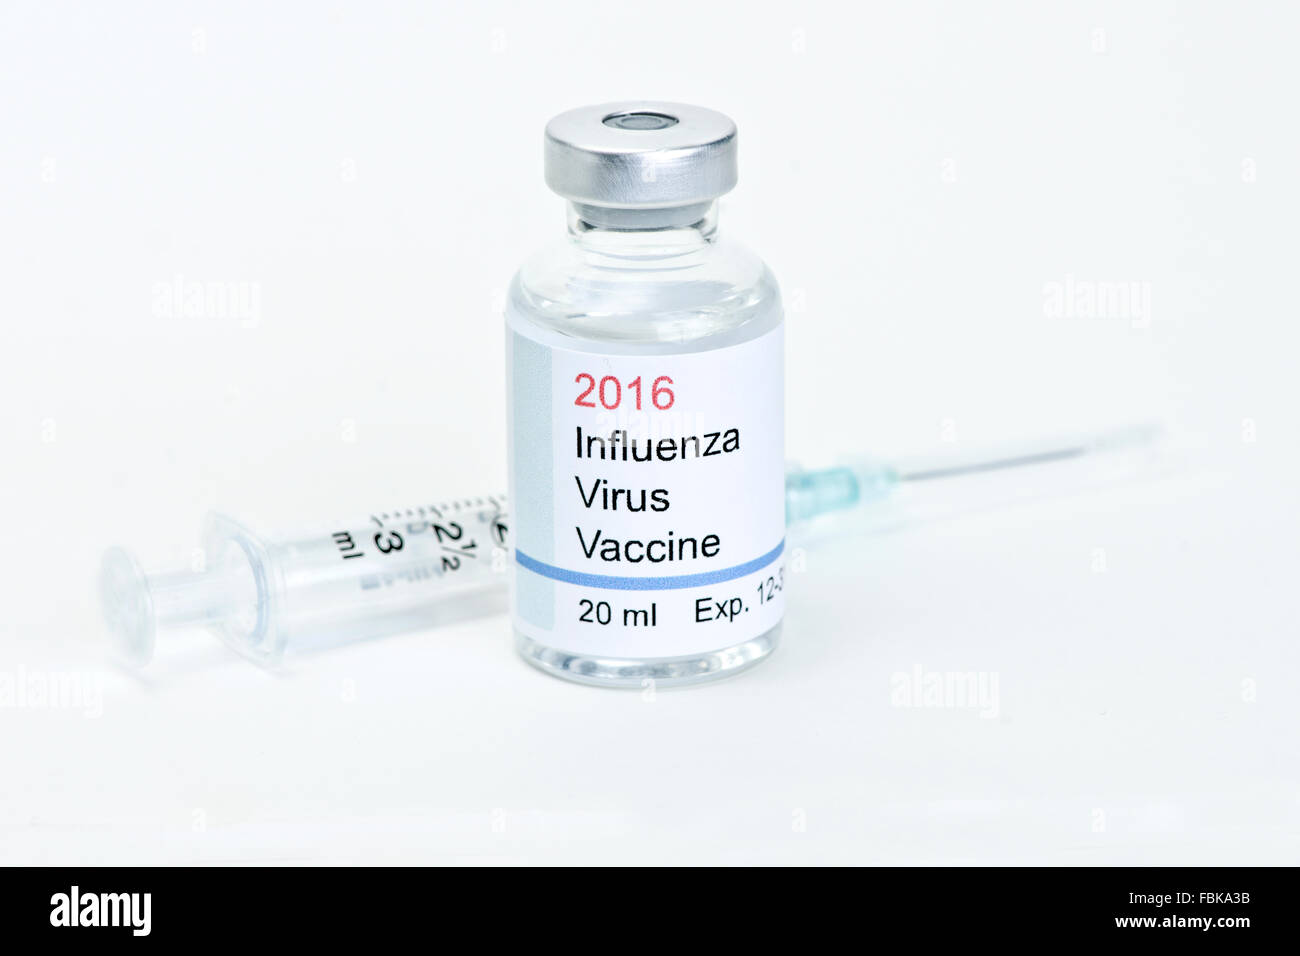 2016 Flu vaccine fascimile. All labels, documents are fictitious.  Names, serial numbers, dates are random and any resemblance t Stock Photo